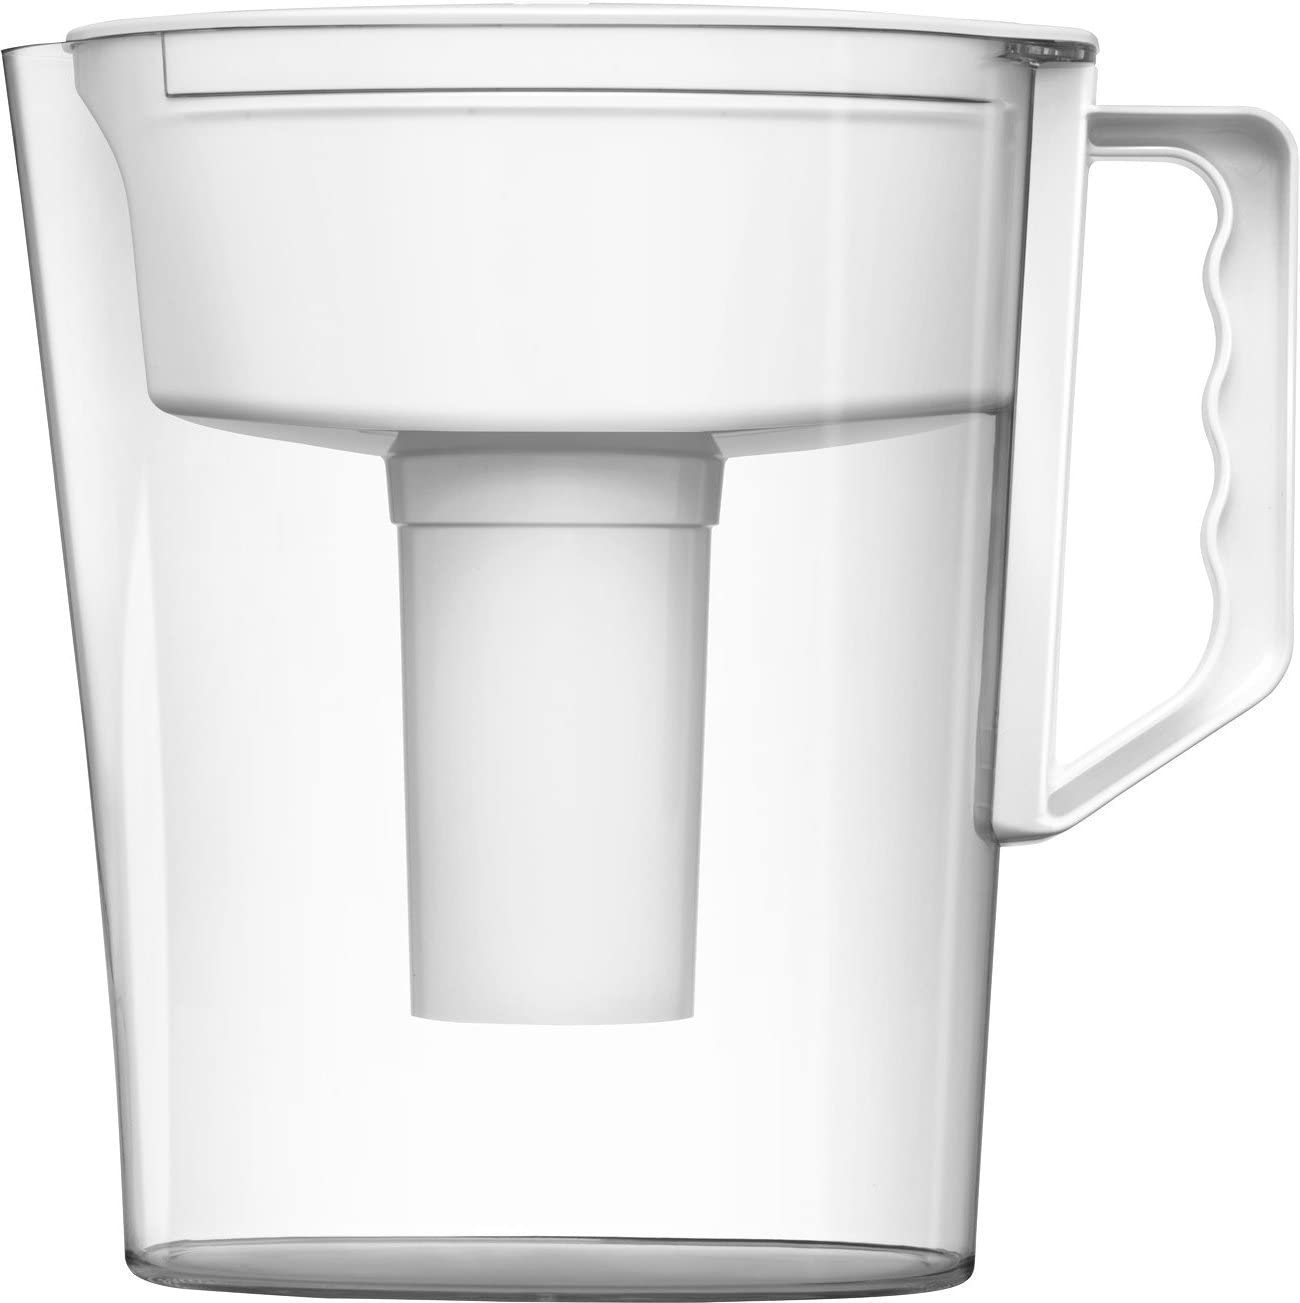 Brita Water Pitcher, Slim, 5 Cup Capacity, Includes One Advanced Filter-White, Size